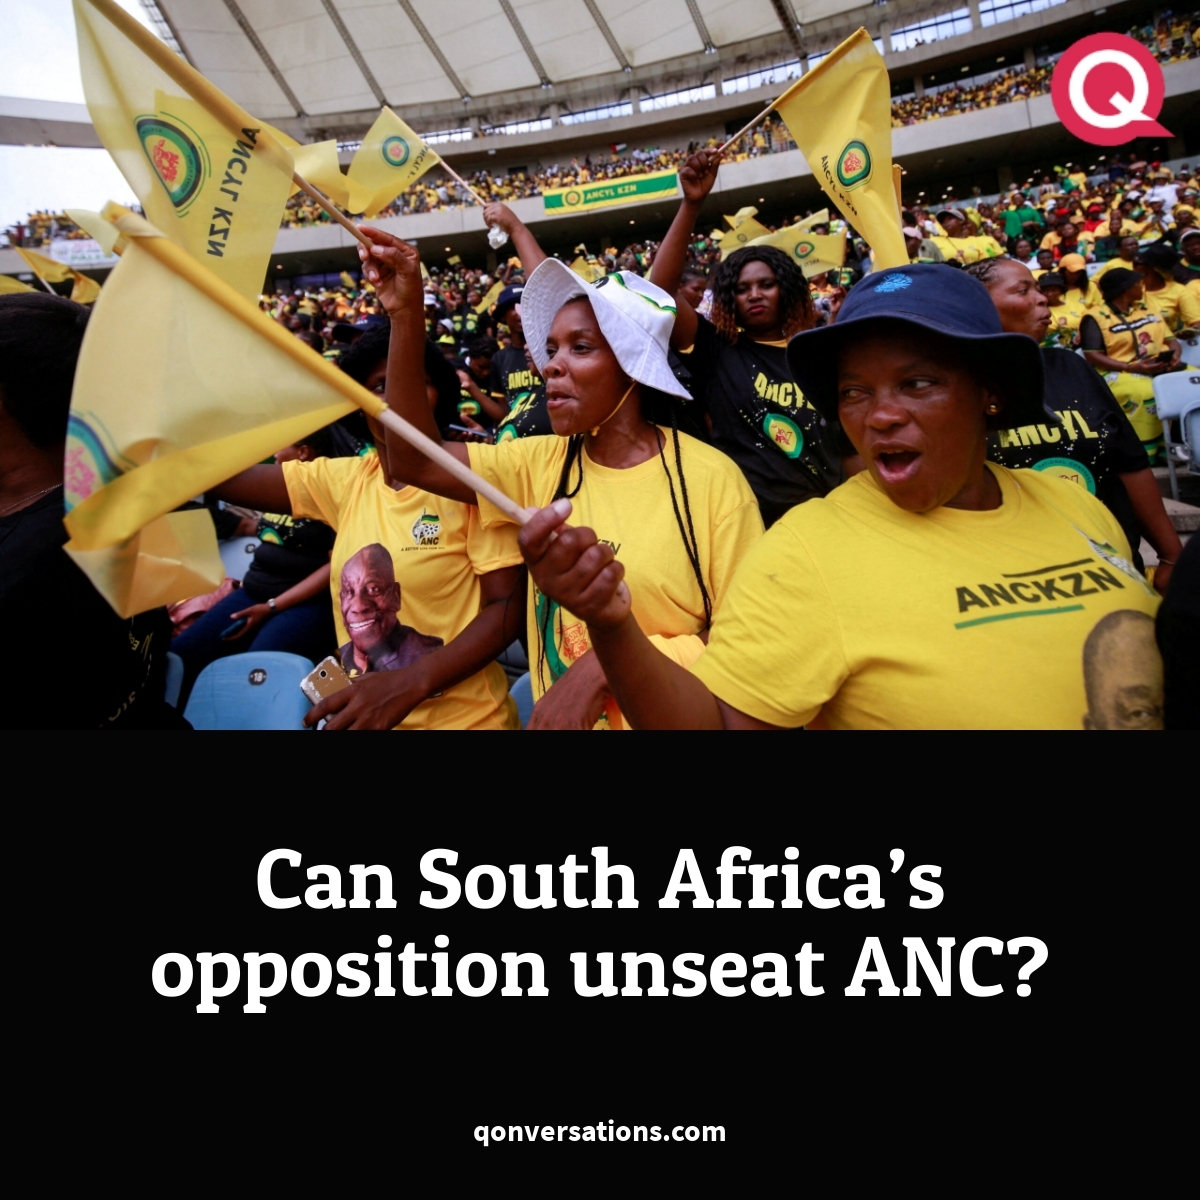 #talkingpoint For the first time in 30 years, #SouthAfrica’s governing party faces an electoral crisis with expectations that its support will dramatically reduce and it may lose its parliamentary majority in this month’s #election. qonversations.com/can-south-afri…